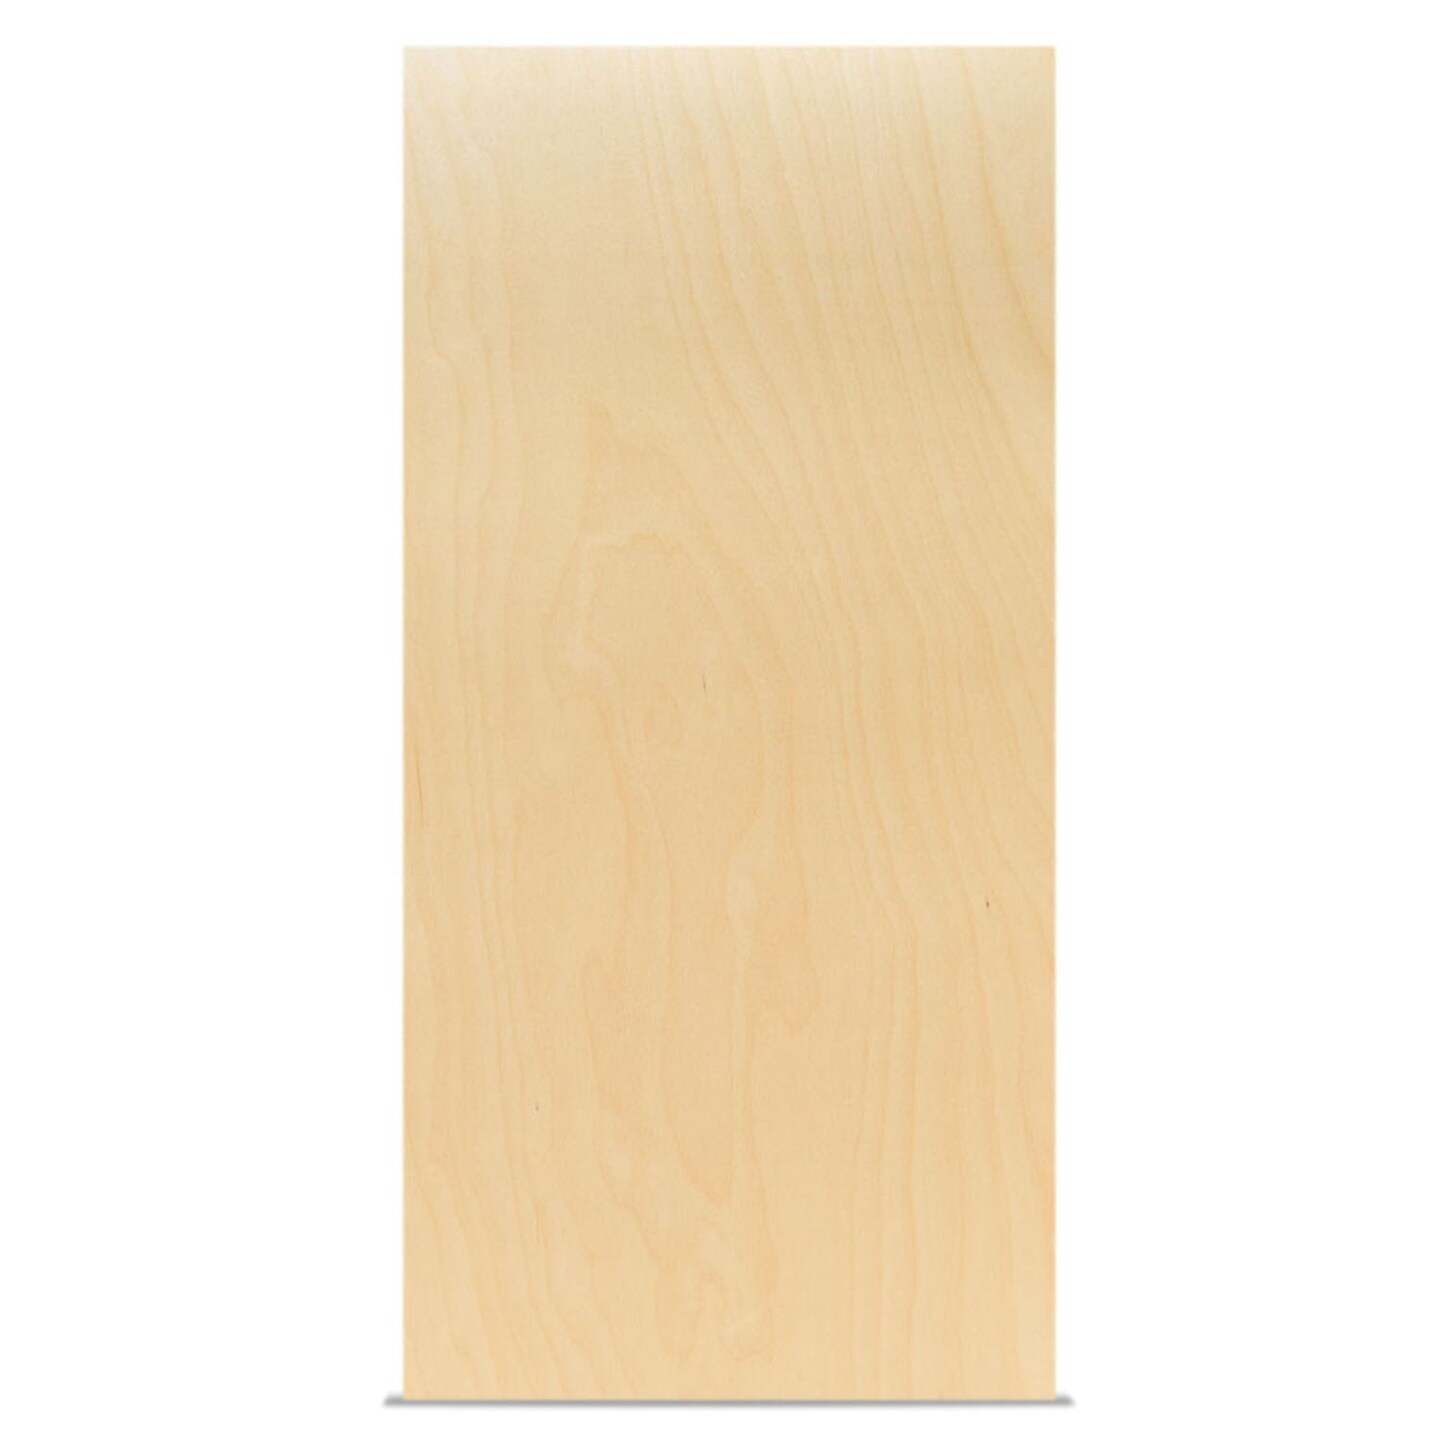 Baltic Birch Plywood, 12 x 24 Inch, B/BB Grade Sheets, 1/4 or 1/8 Inch Thick| Woodpeckers